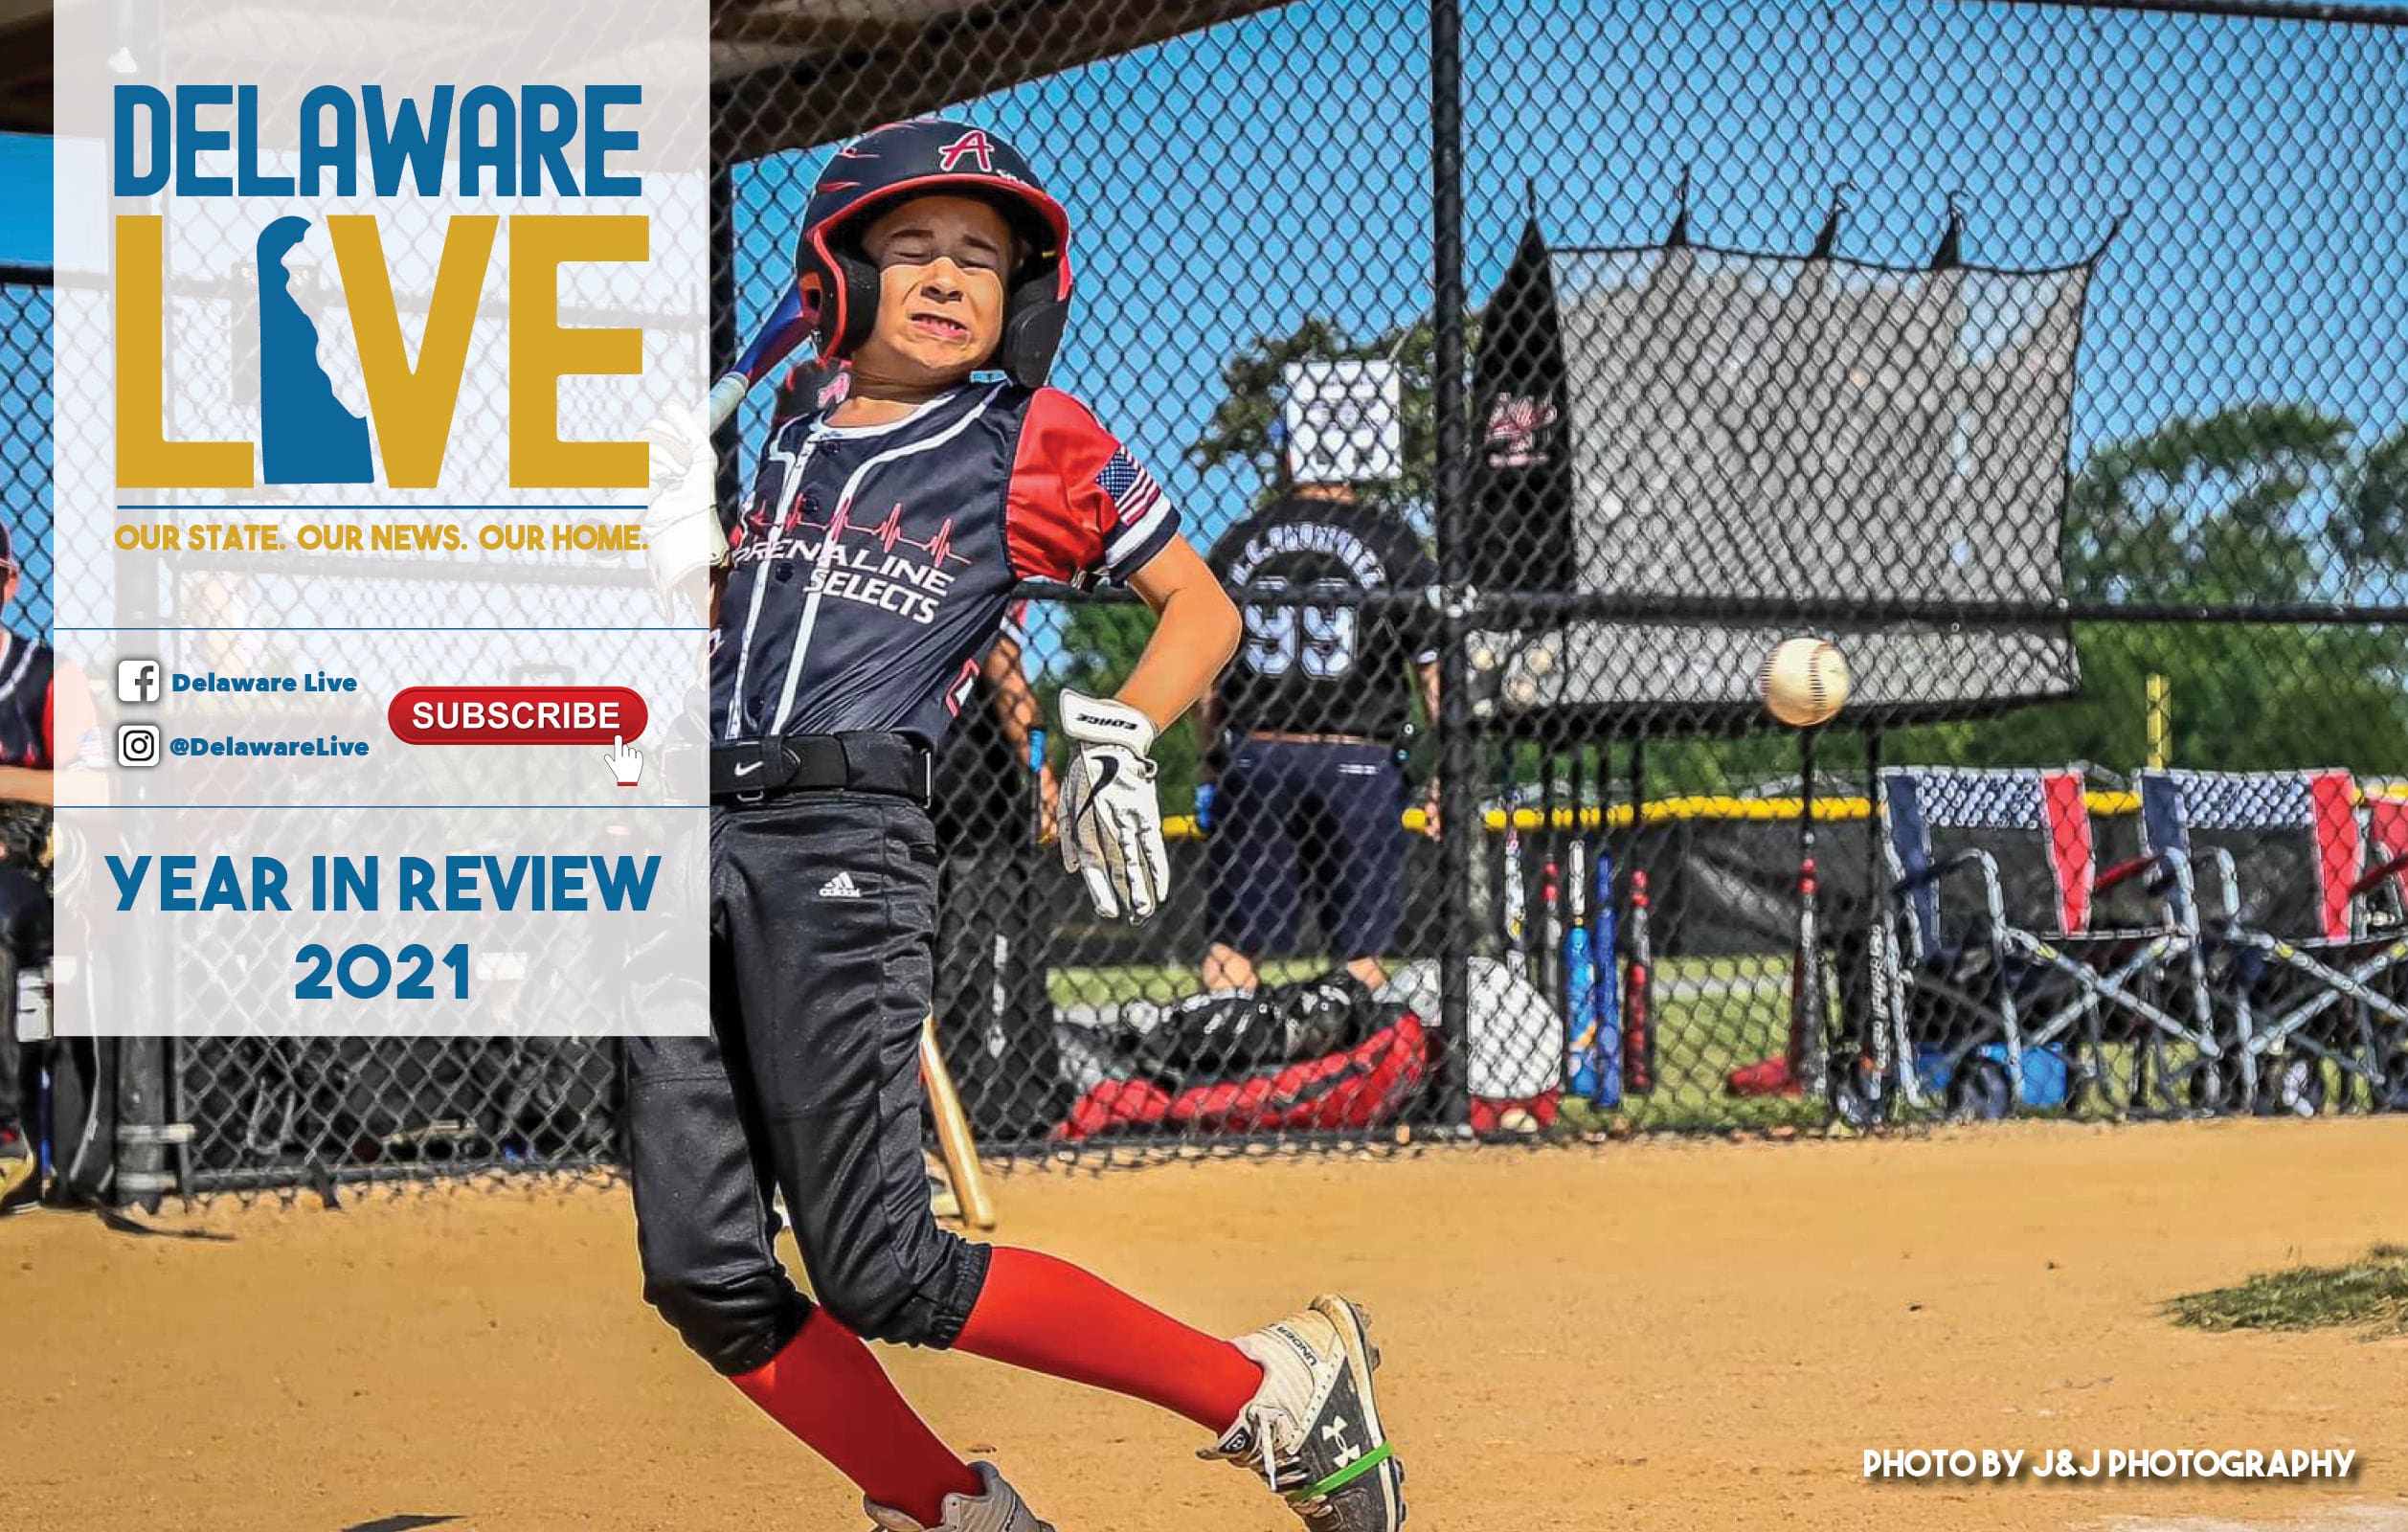 Delaware LIVE Weekly Review – YEAR IN REVIEW 2021